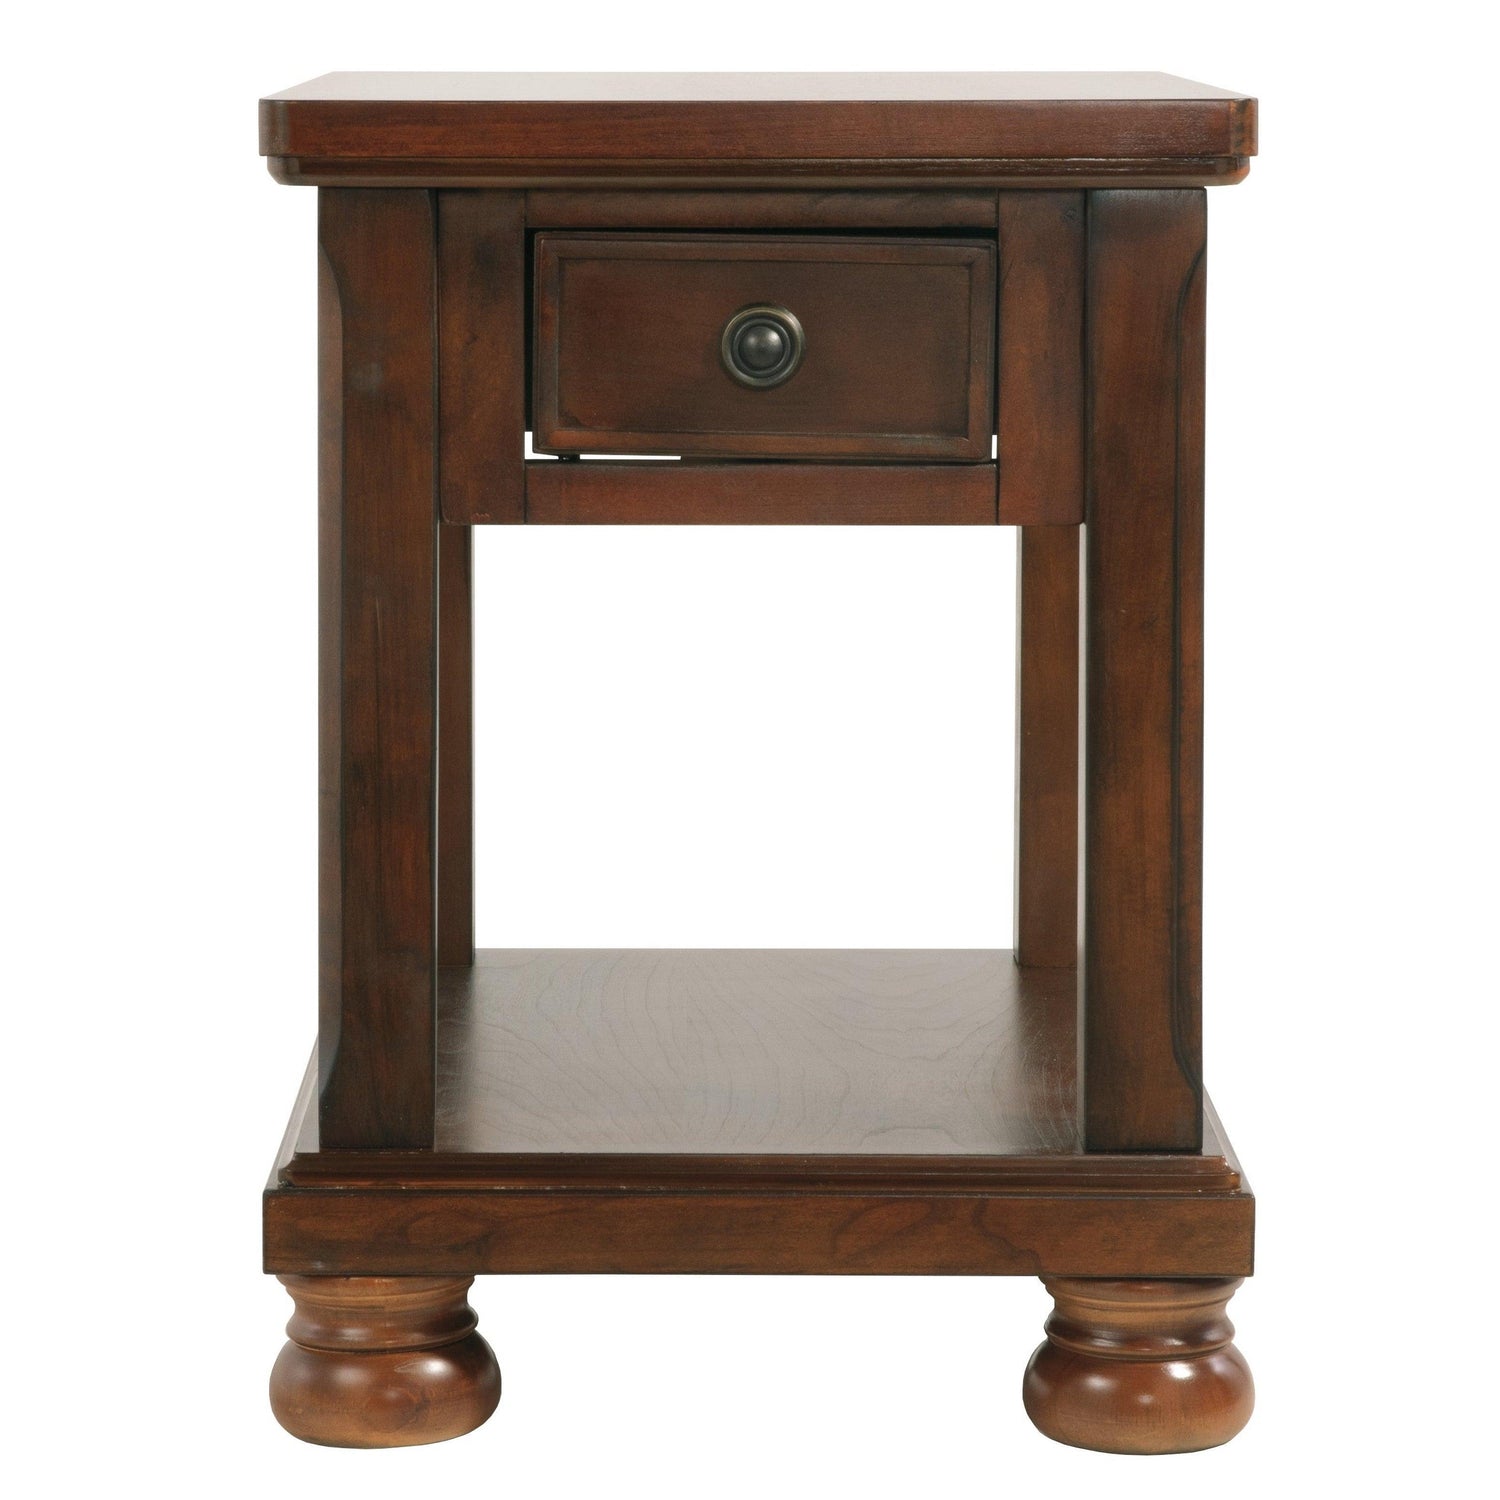 Porter Chairside End Table Ash-T697-3